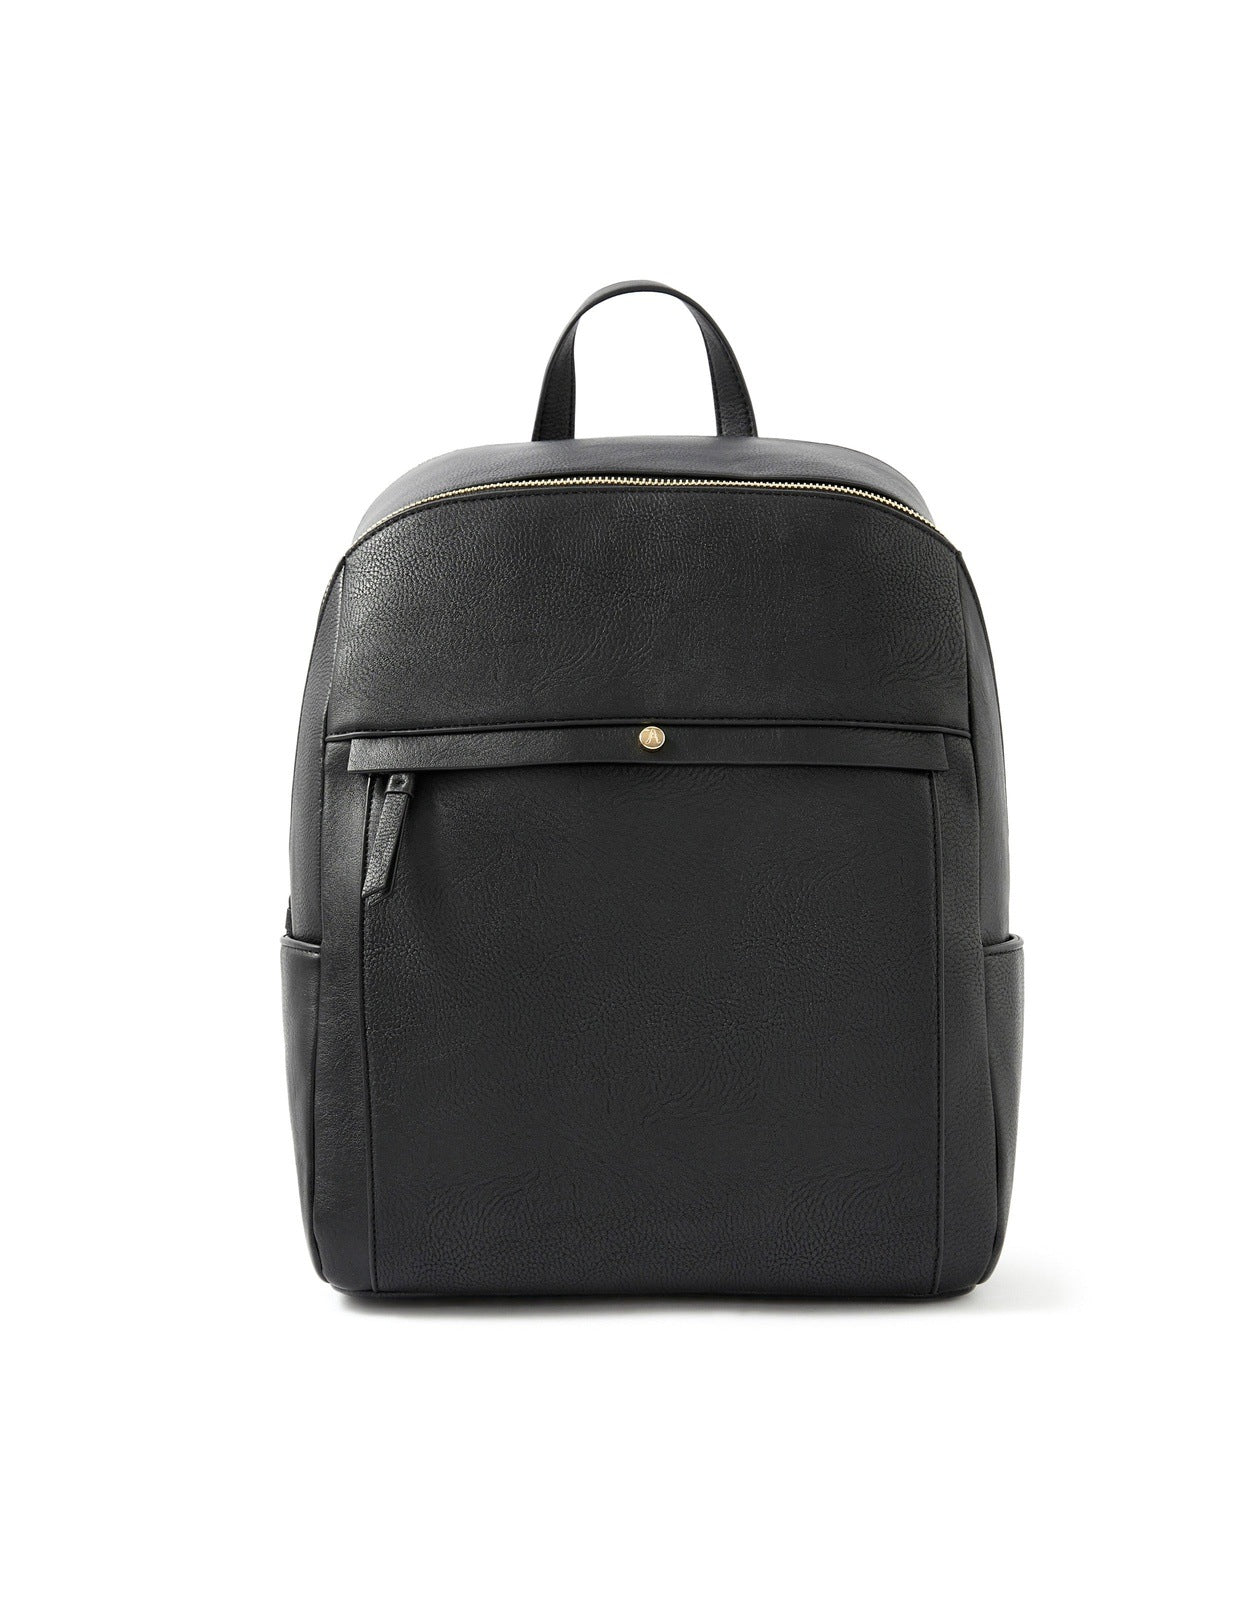 Acer Commercial Backpack/ Office Bag ( Black and Cantonic Grey) | Acer India  Official Store